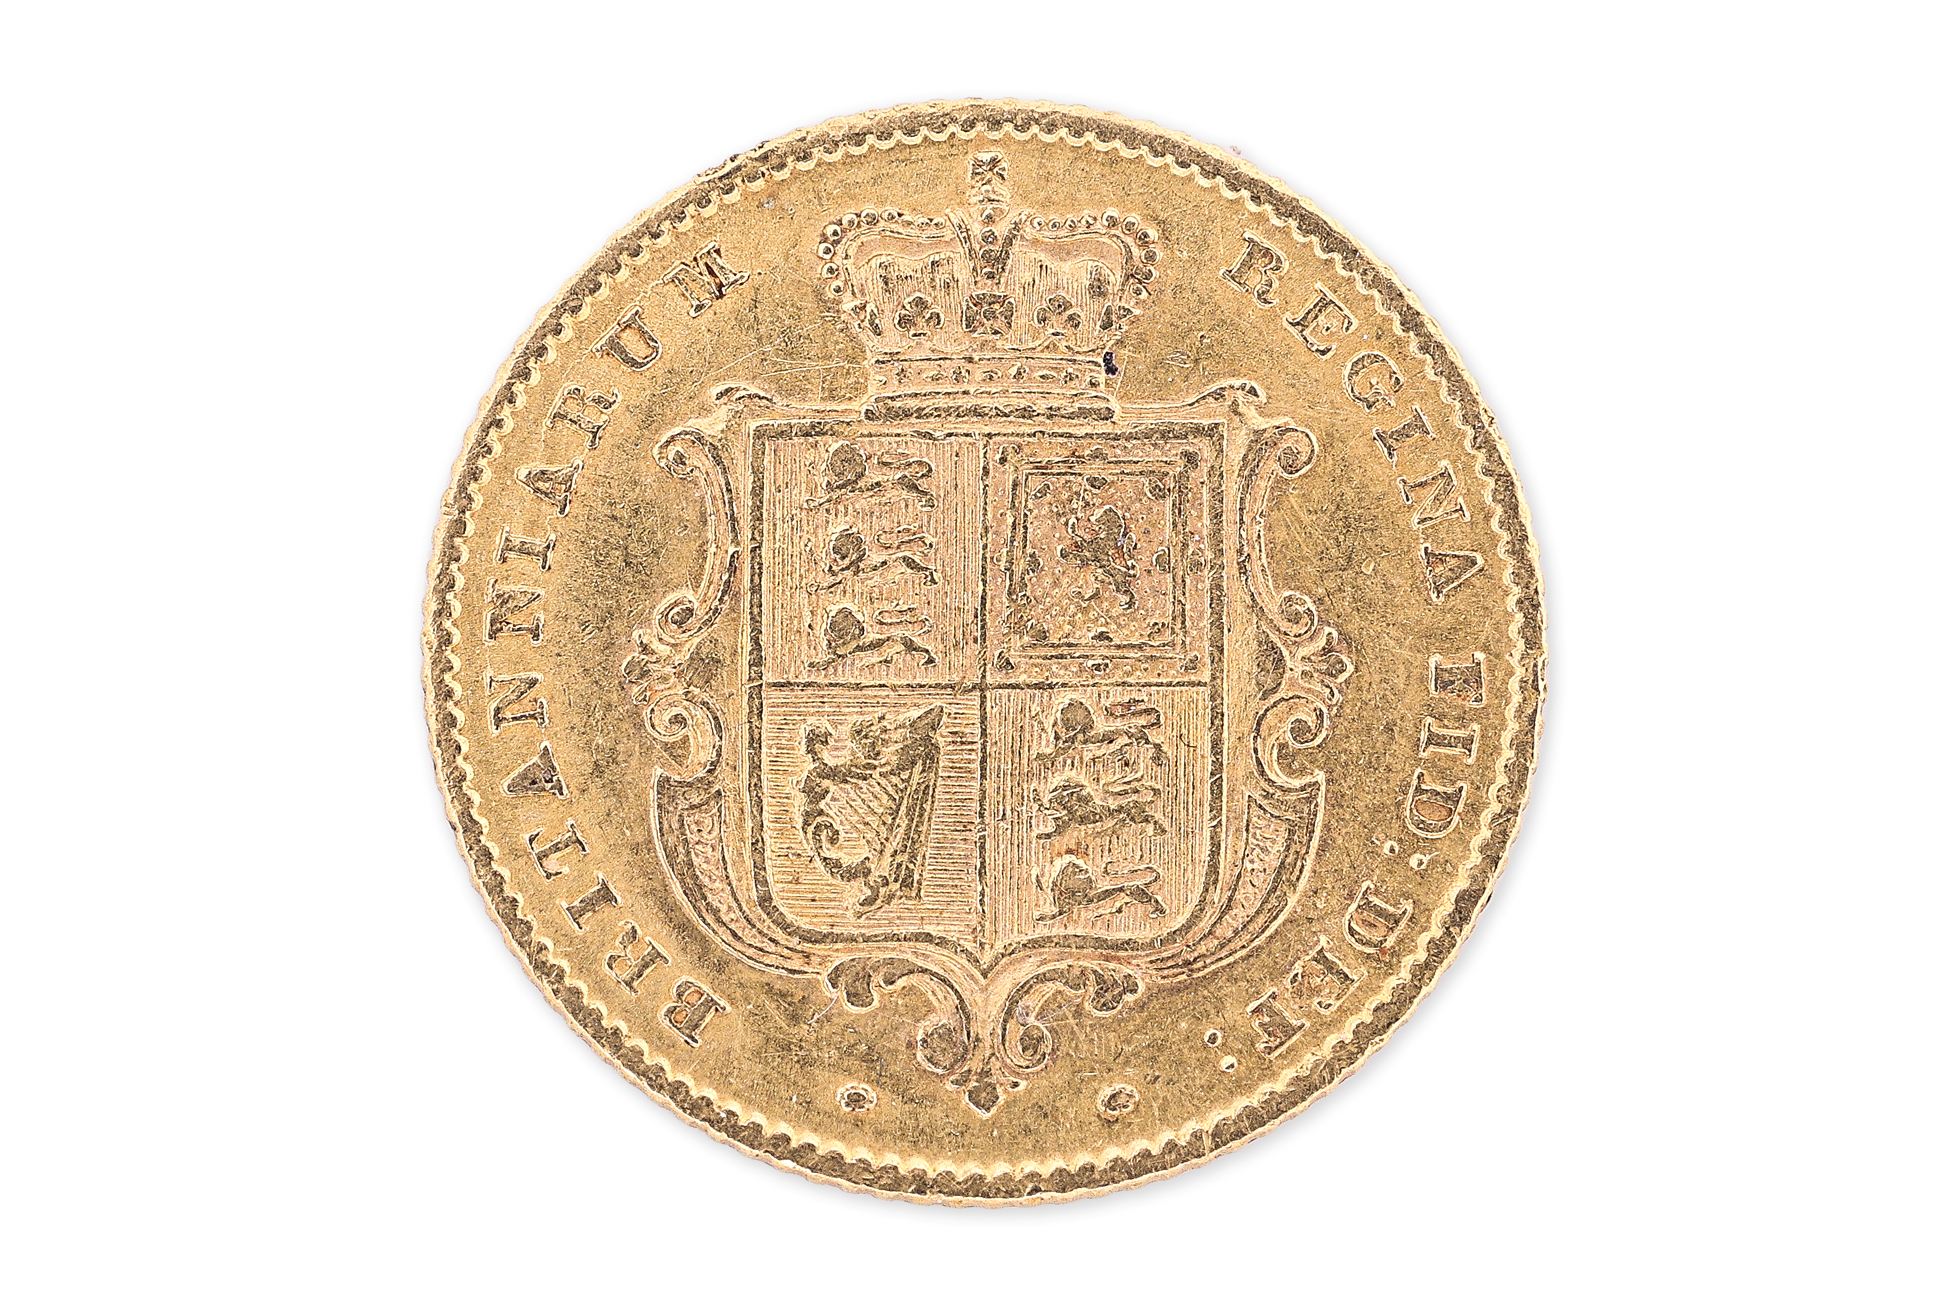 GREAT BRITAIN VICTORIA GOLD 1/2 SOVEREIGN 1847 - Image 2 of 2